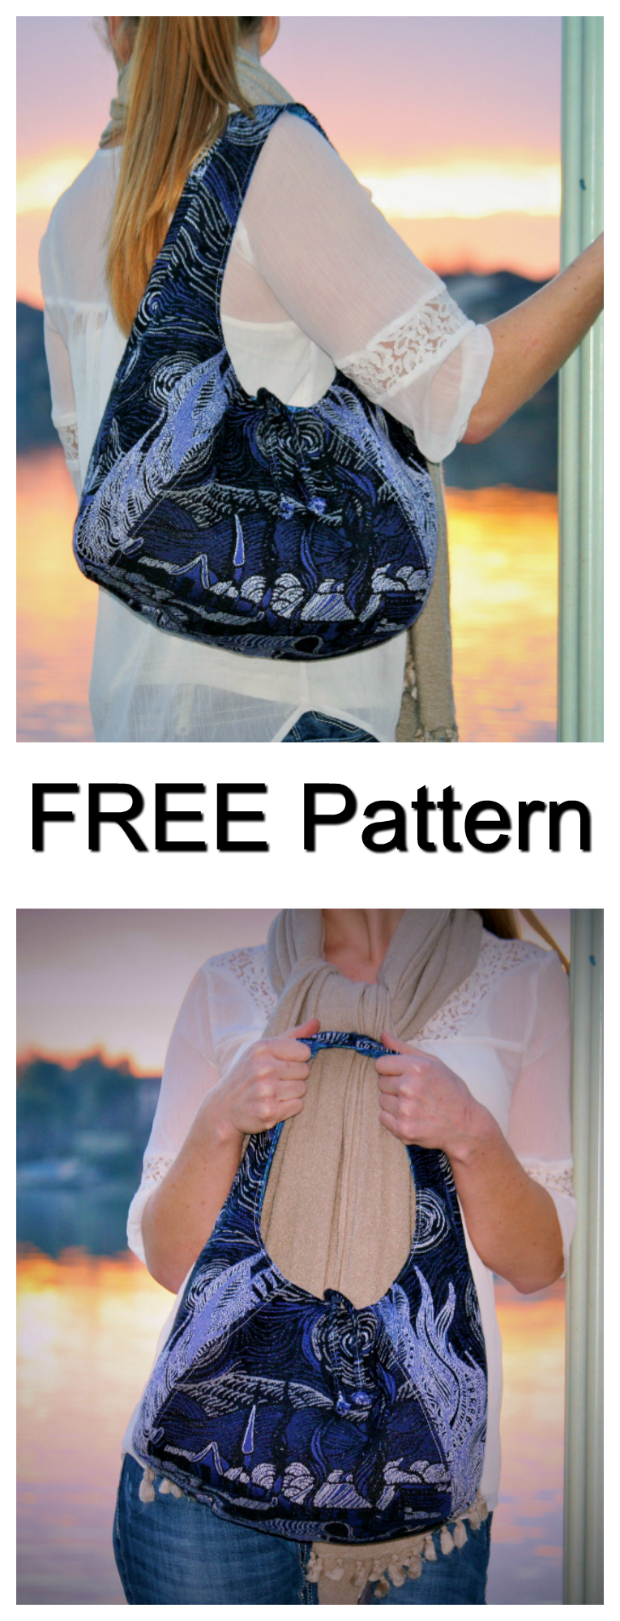 If you are new to sewing then this is a great place to start. The Laney Reversible Hobo Bag is easy to sew and the pattern is FREE. The finished size of the bag is 15" wide by 10" tall by 6" deep.